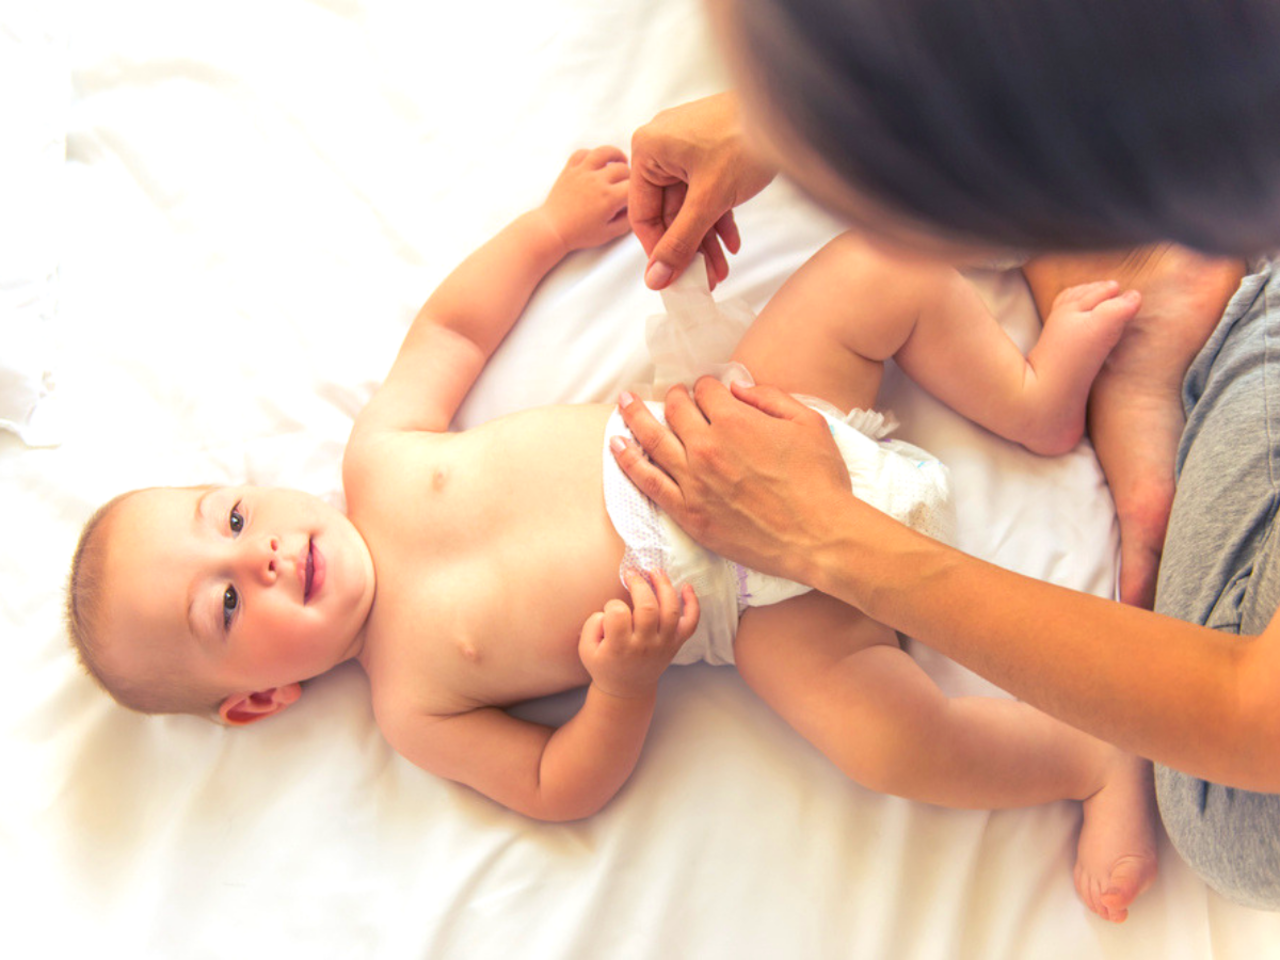 Is It Safe To Make Babies Wear Diapers Daily? Know What A